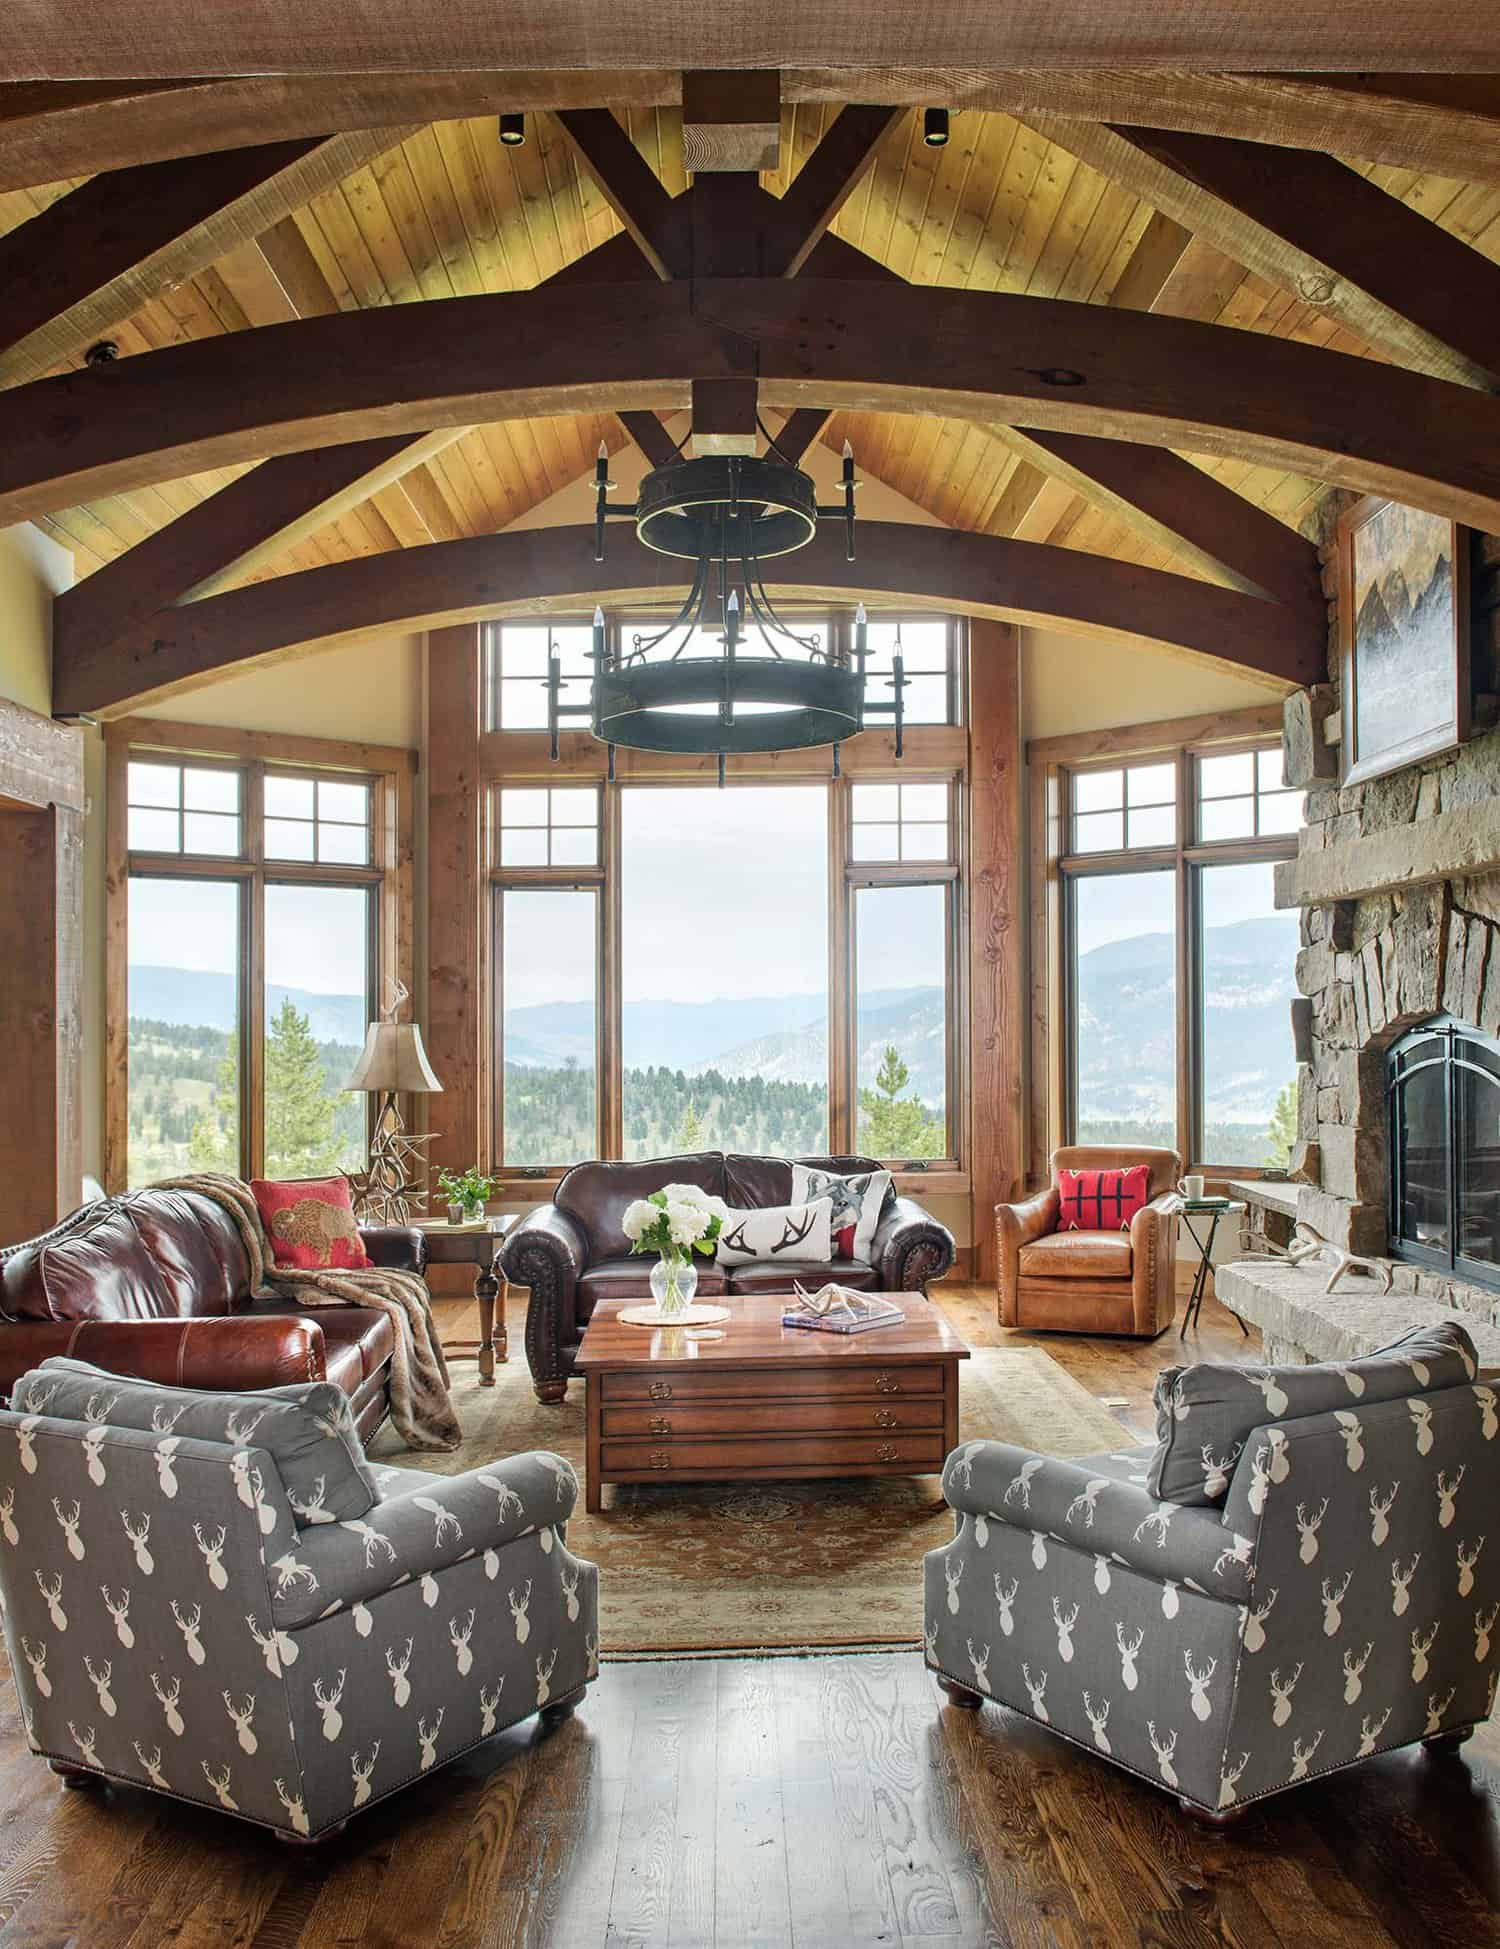 Step into this mountain rustic dream home nestled in the Rocky Mountains